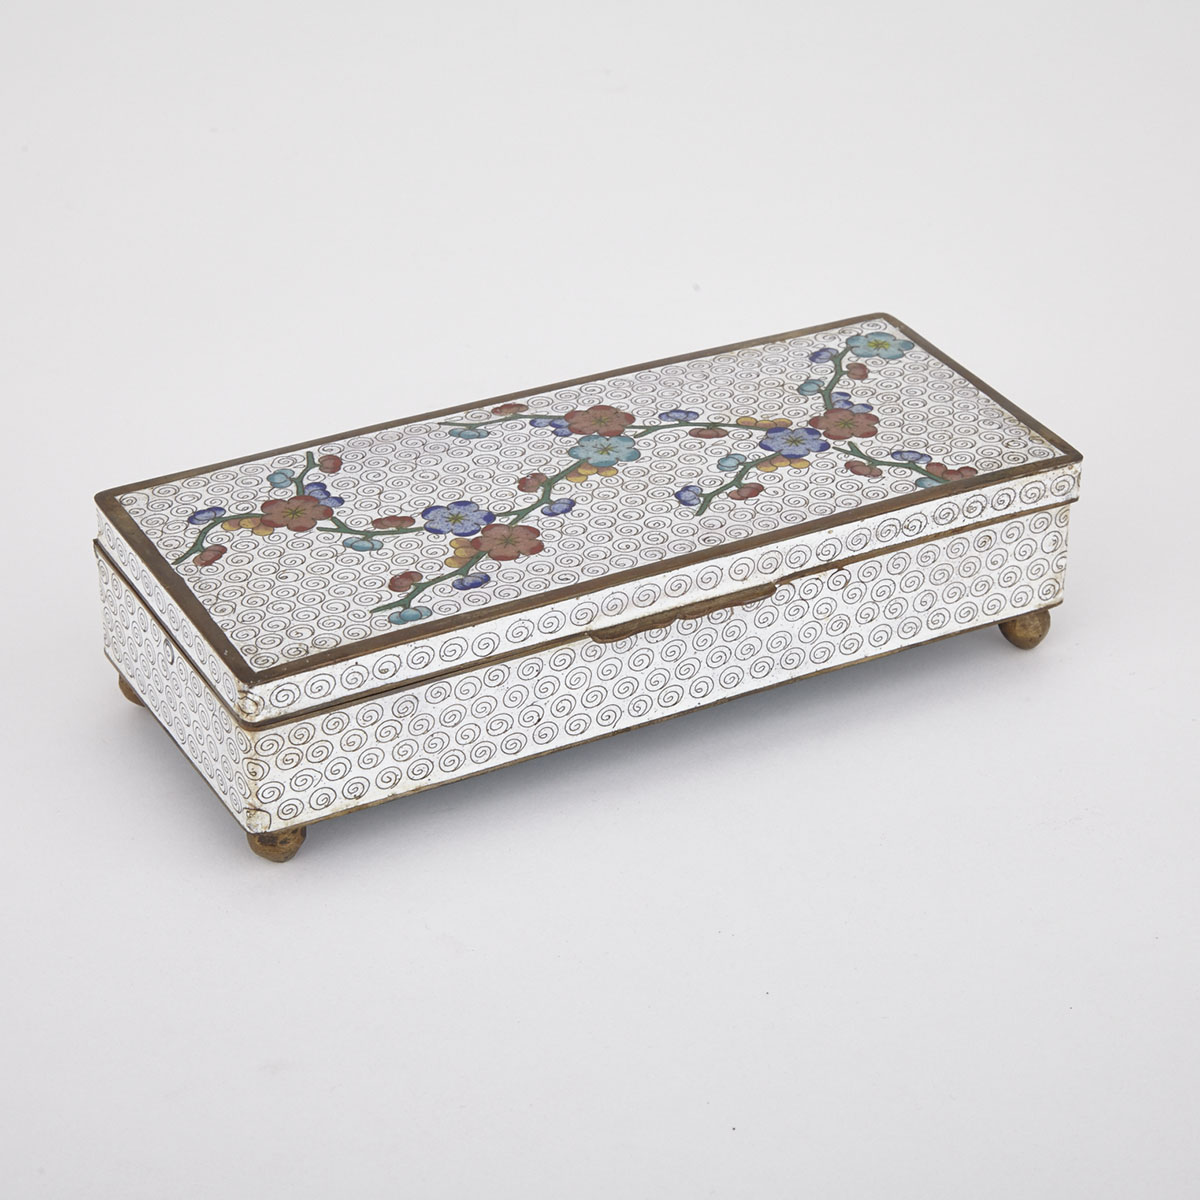 Chinese Cloisonne Box, Early 20th Century